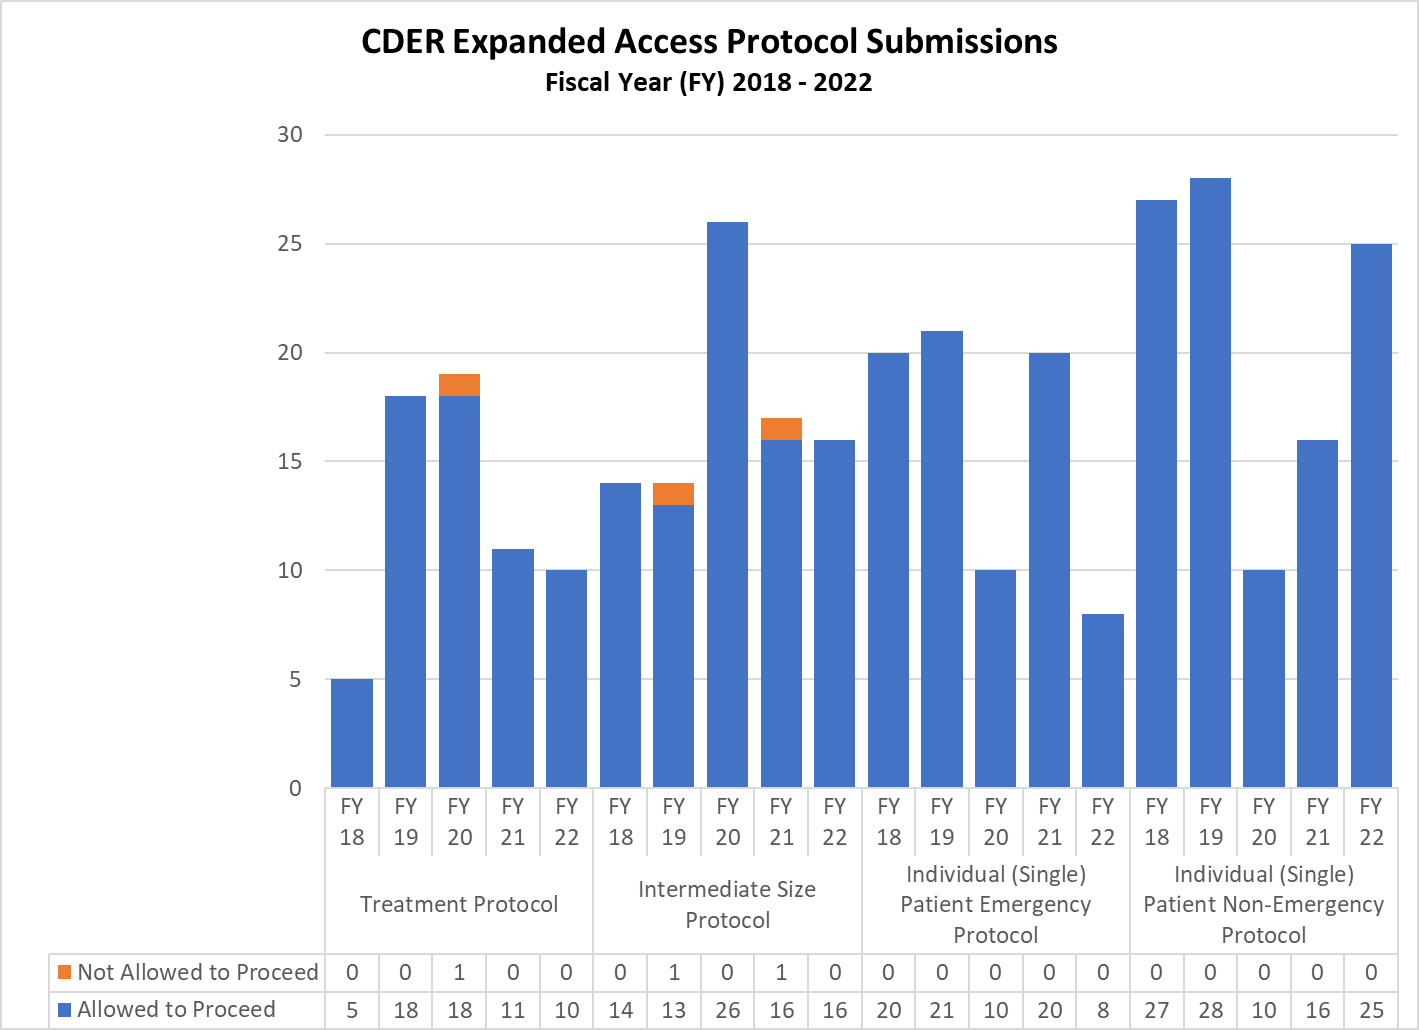 CDER Expanded Access Protocol Submissions Fiscal Year (FY) 2018 - 2022